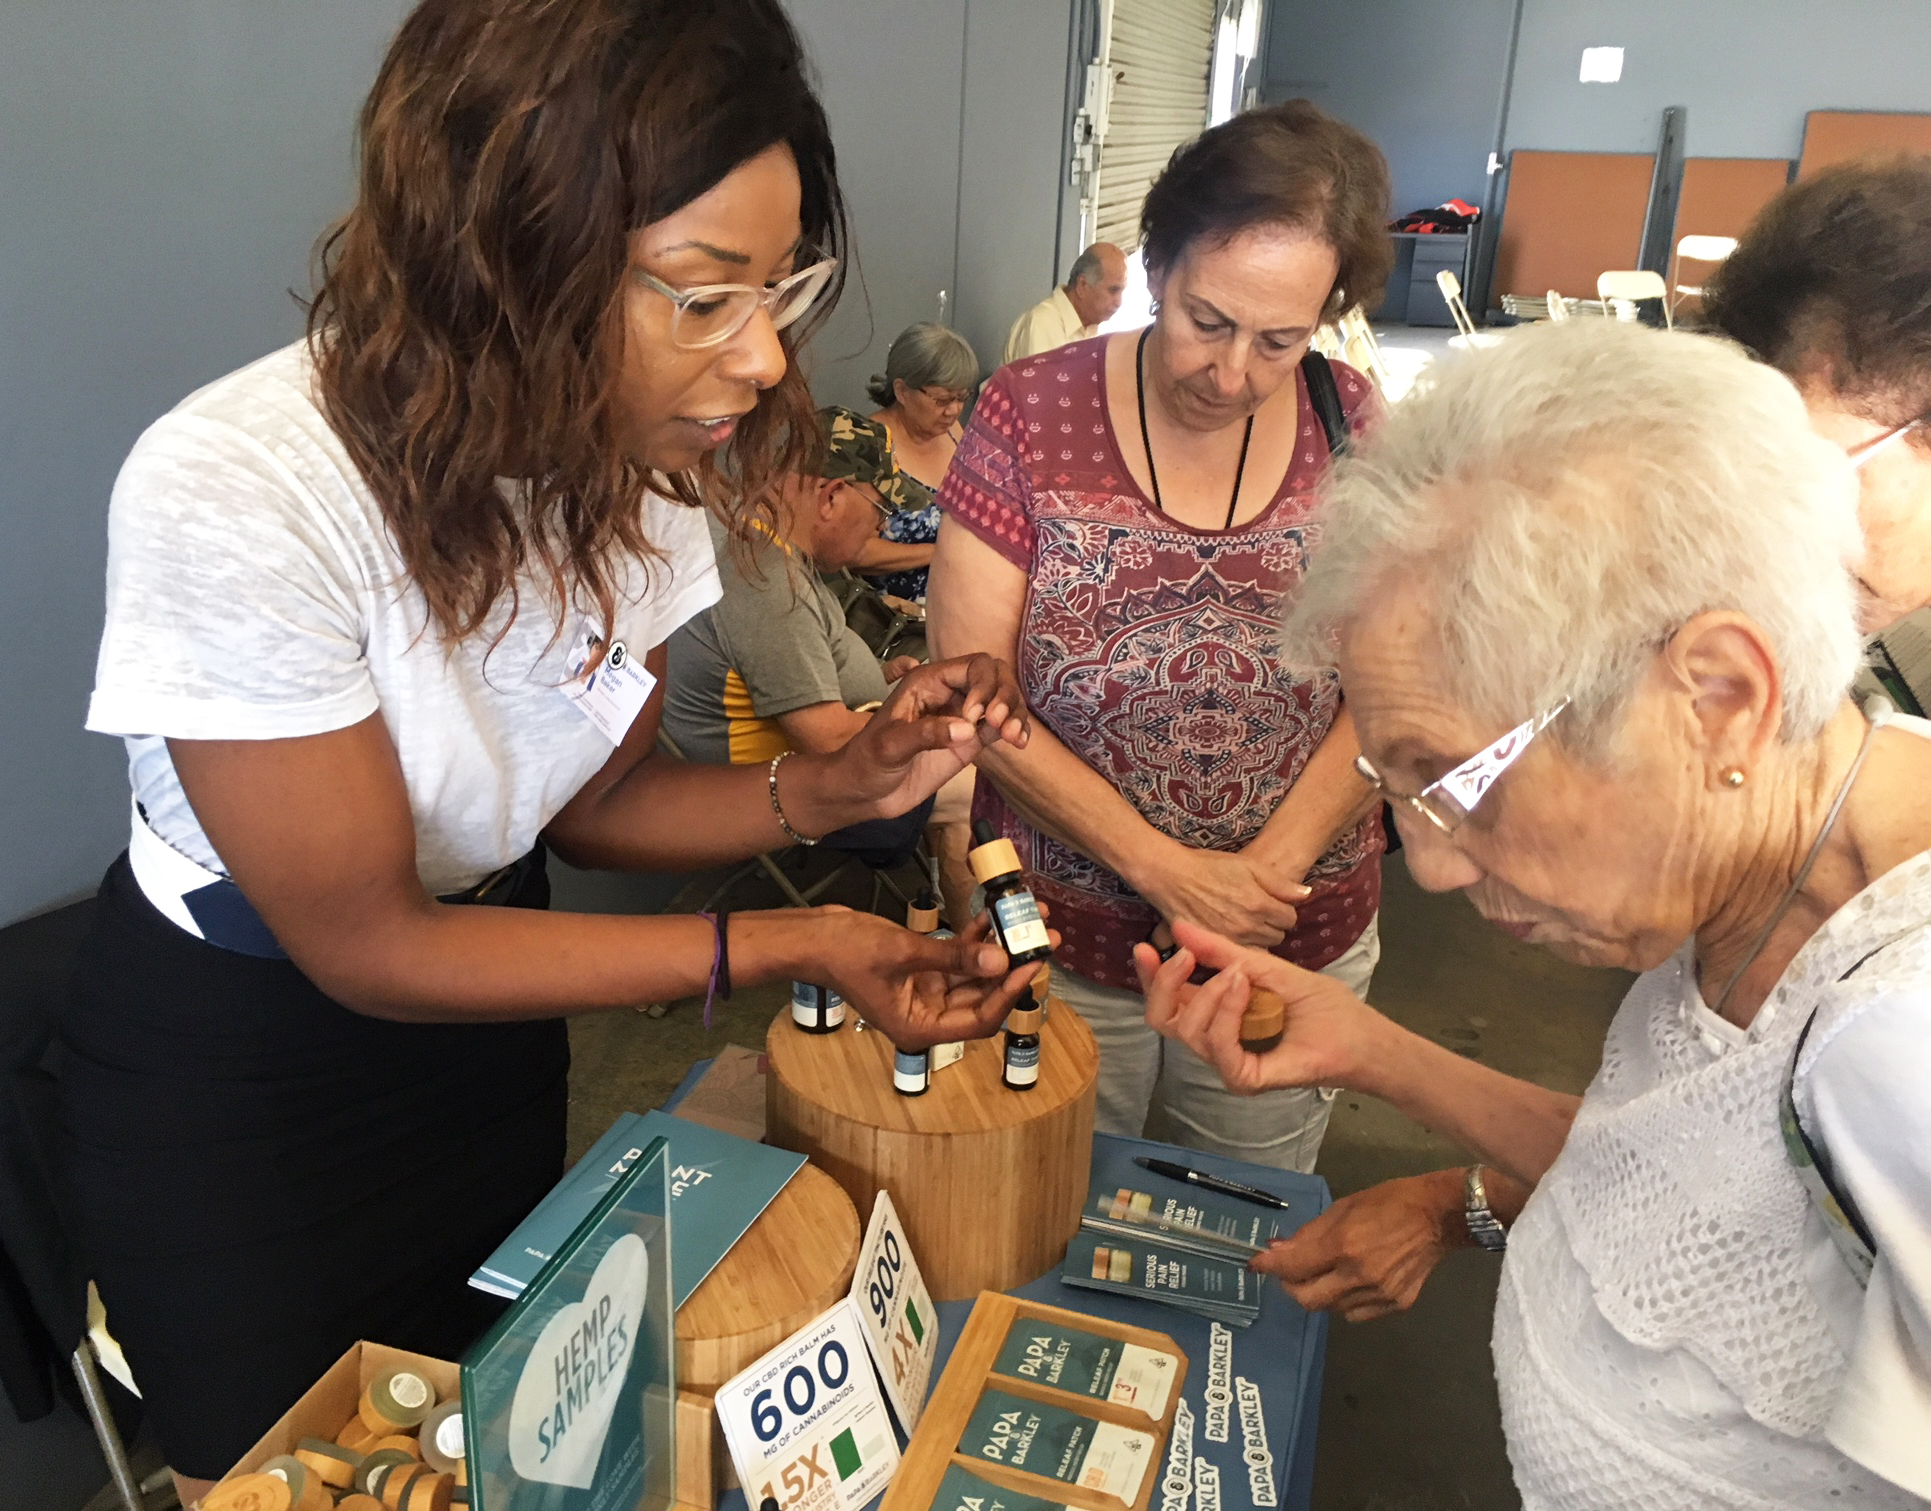 Megan Baker (left) of Papa & Barkley Co., a Cannabis company based in Eureka, Calif., shows Shirley Avedon of Laguna Woods different products intended to help with pain relief. CREDIT: STEPHANIE O'NEILL/NPR